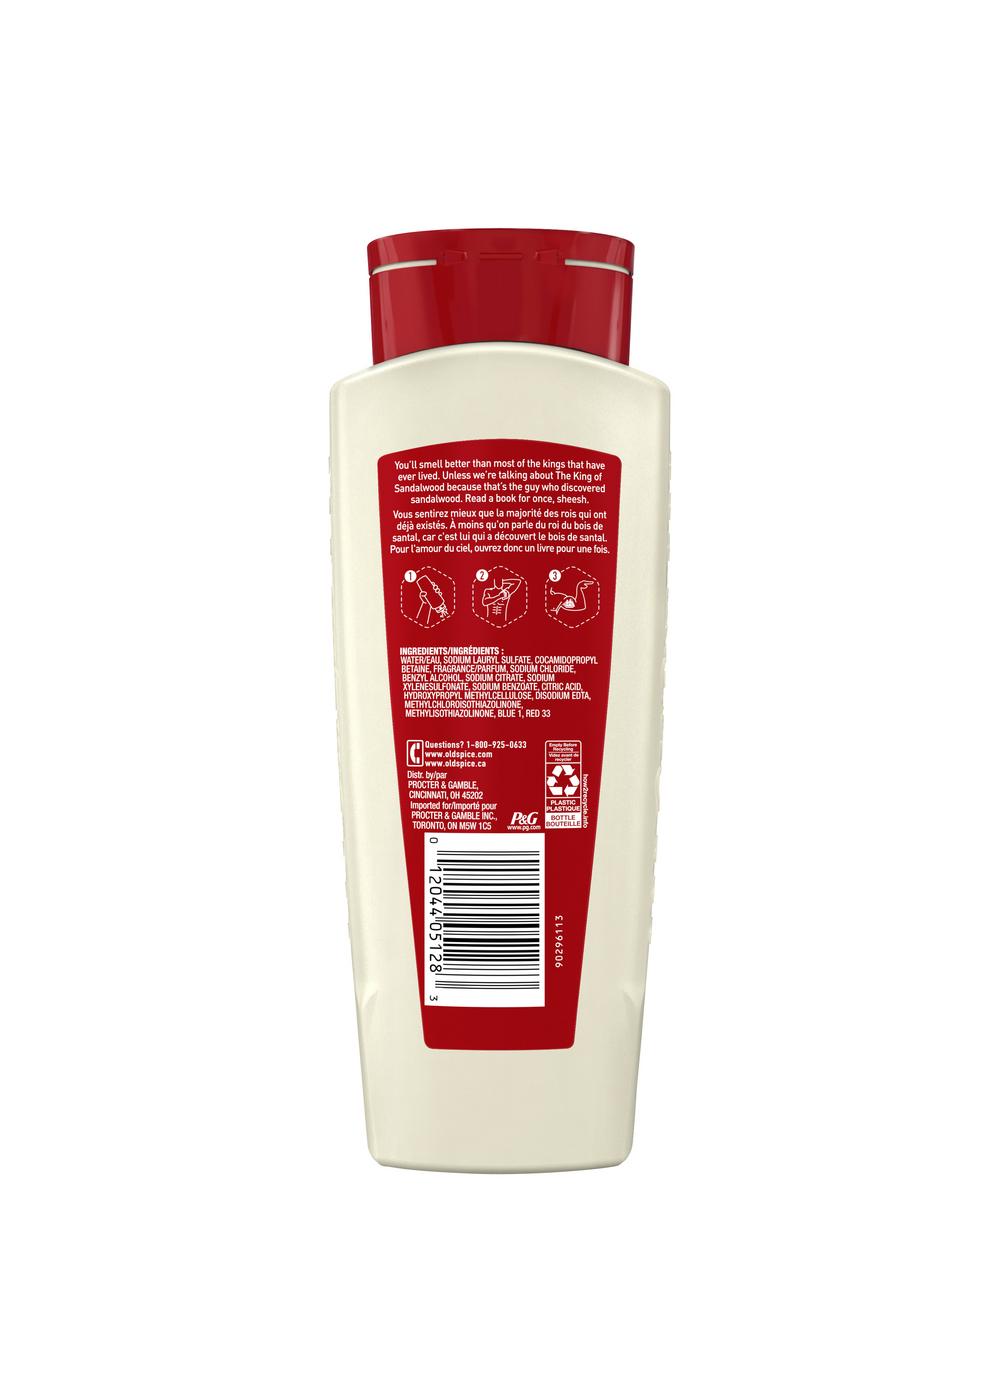 Old Spice Body Wash - Timber with Sandalwood; image 2 of 2